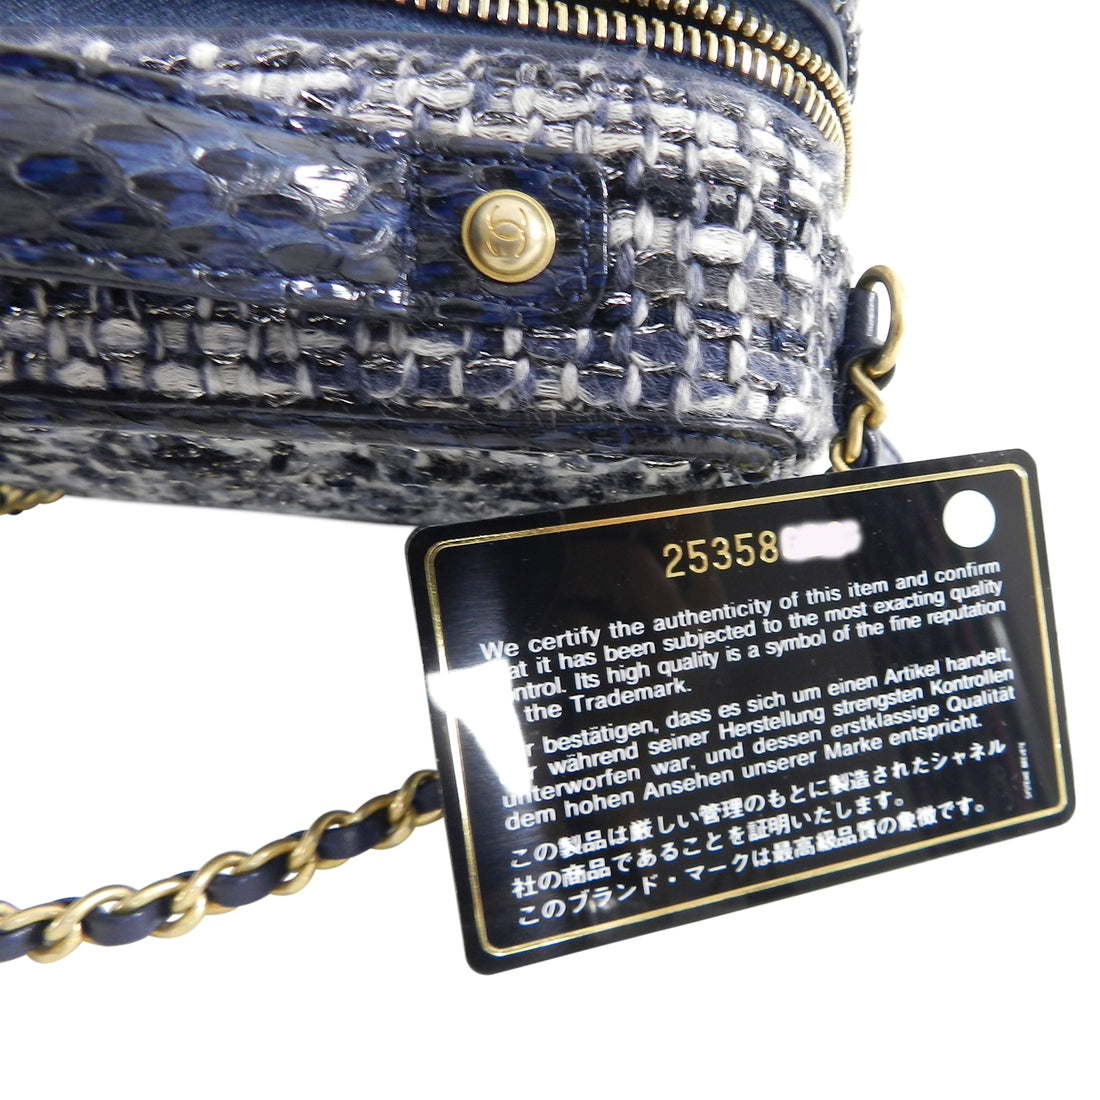 Chanel Quilted Small CC Filigree Vanity Case Navy Tweed Python Handle –  Coco Approved Studio